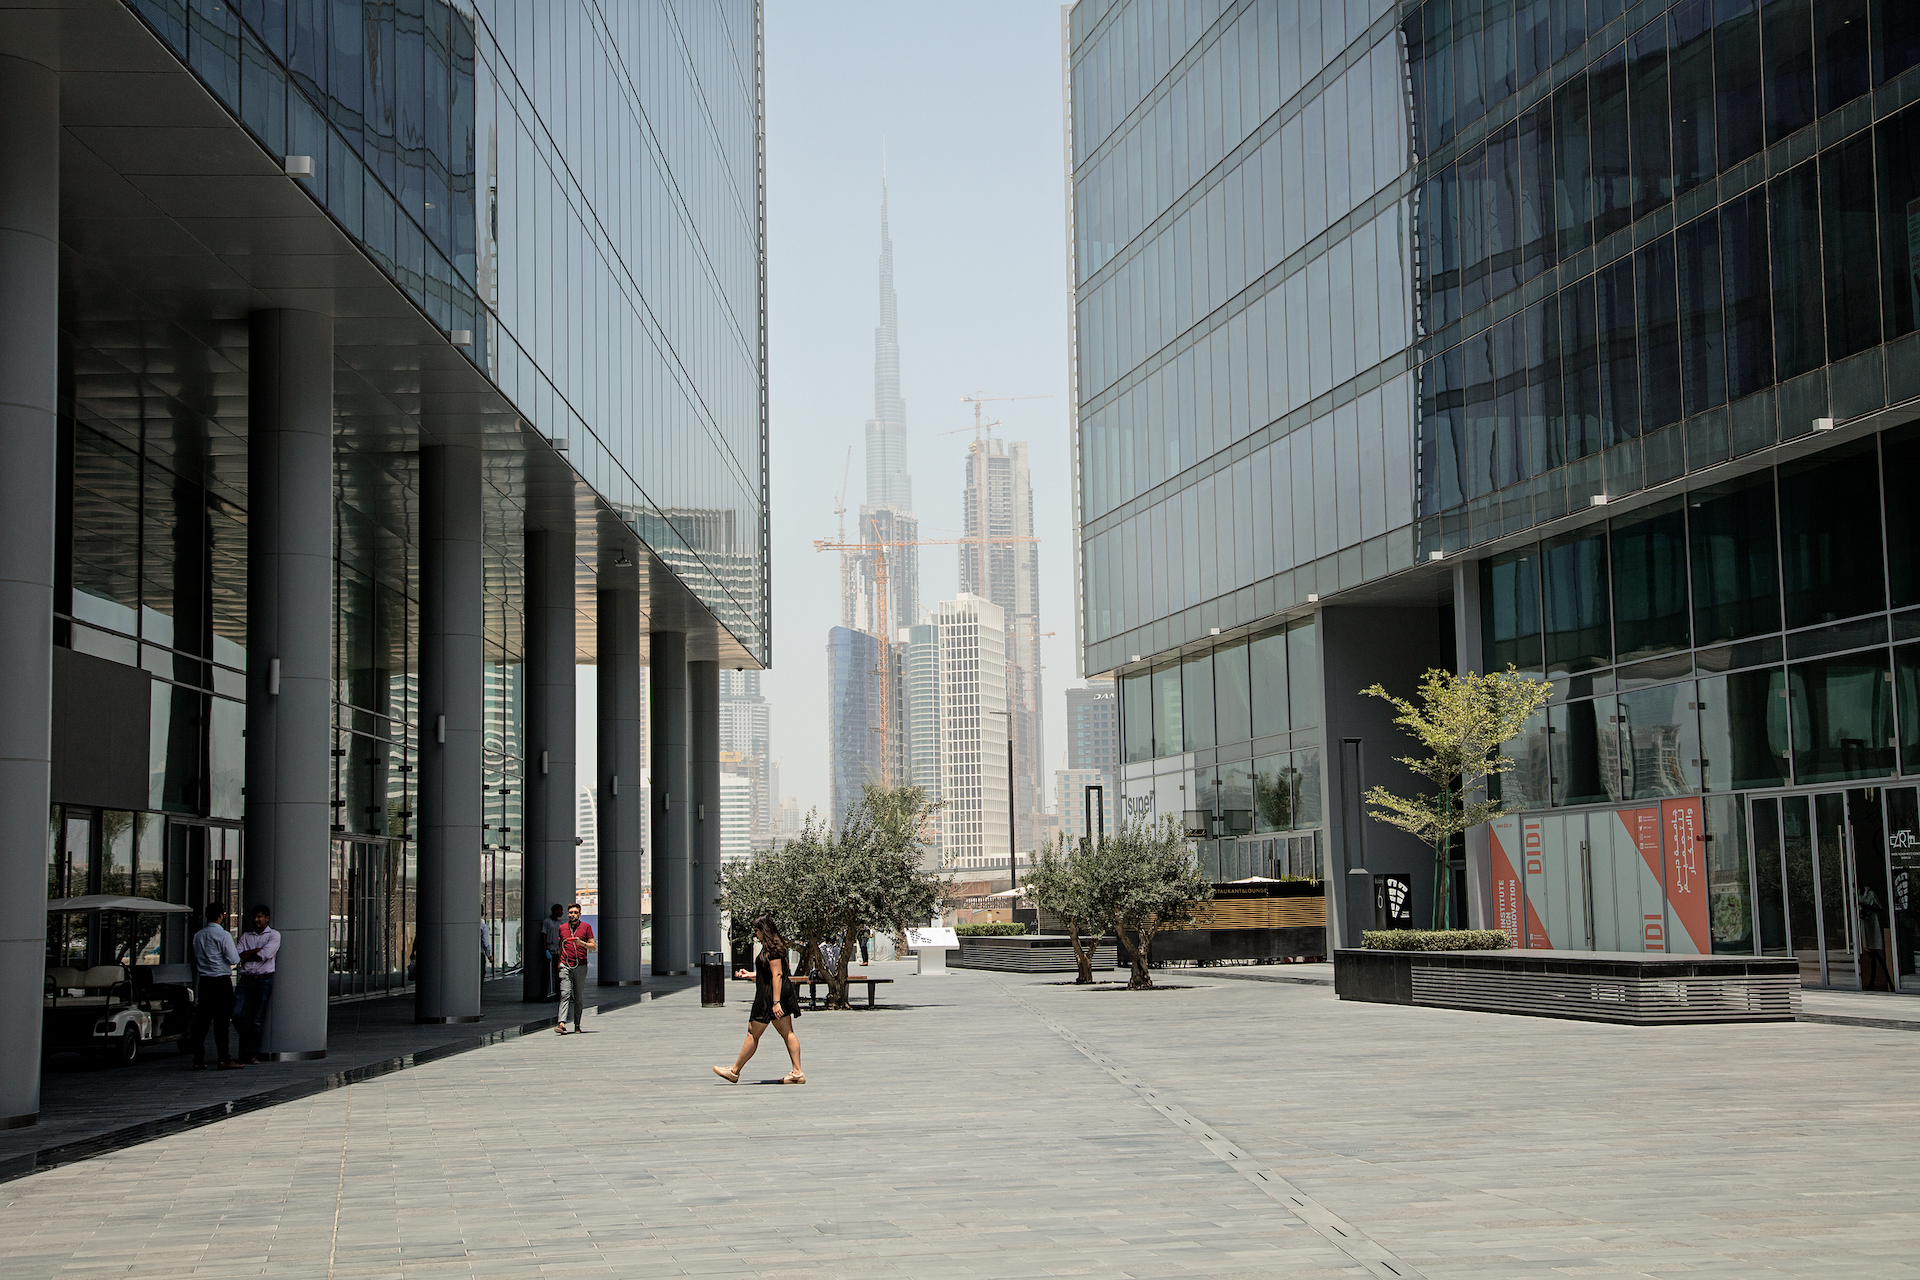 View of Burj Khalifa between two high rise buildings and people walking past